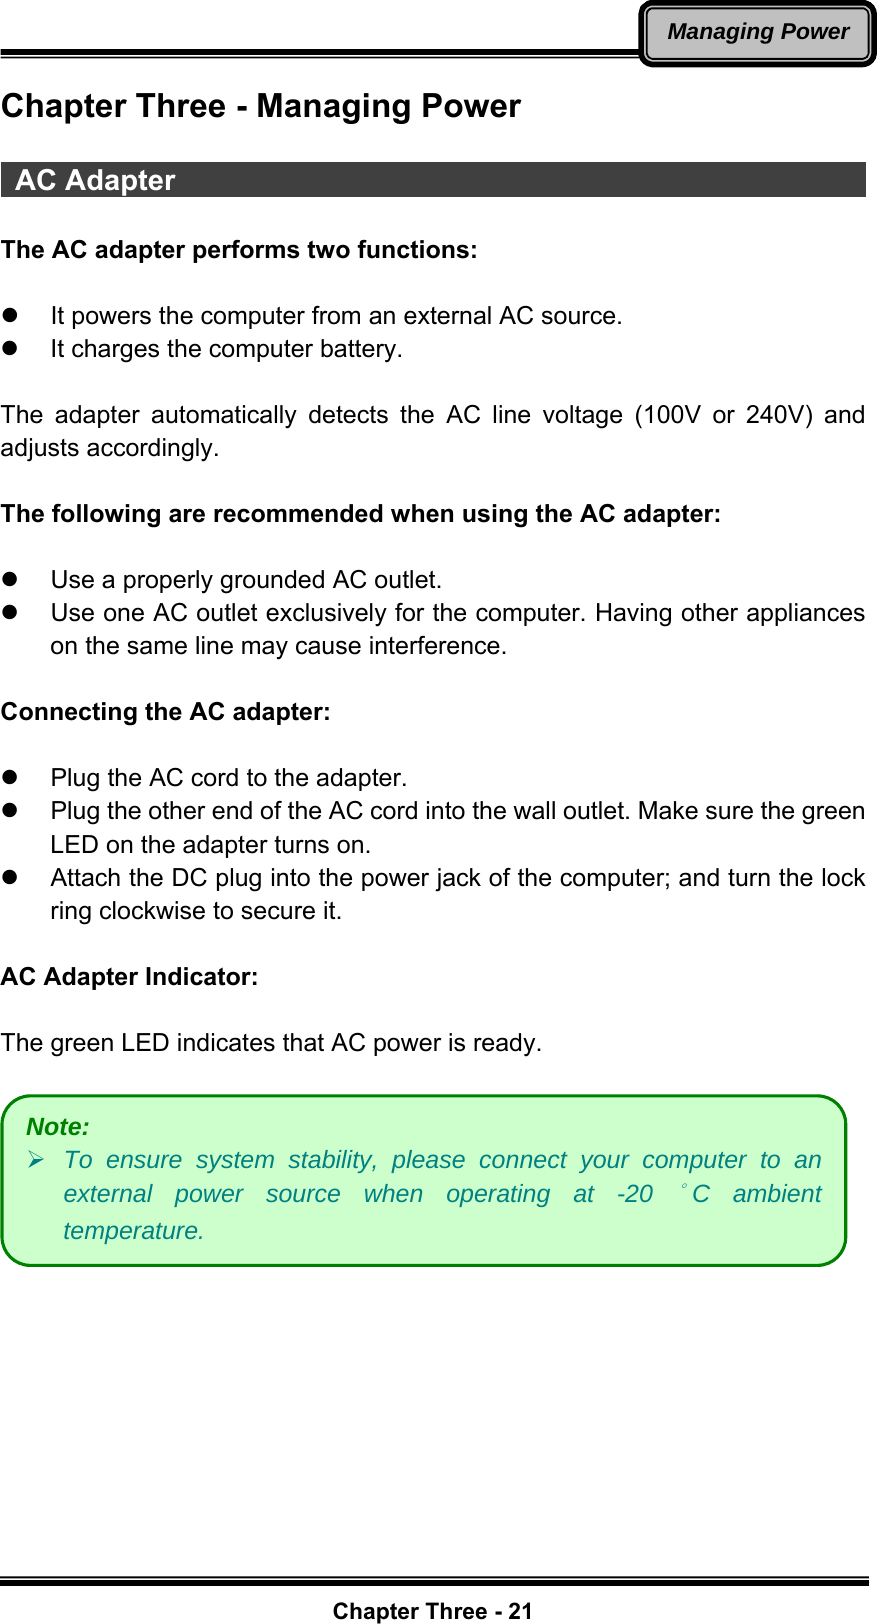   Chapter Three - 21Managing PowerChapter Three - Managing Power   AC Adapter                                                  The AC adapter performs two functions:  z  It powers the computer from an external AC source. z  It charges the computer battery.  The adapter automatically detects the AC line voltage (100V or 240V) and adjusts accordingly.  The following are recommended when using the AC adapter:  z  Use a properly grounded AC outlet. z  Use one AC outlet exclusively for the computer. Having other appliances on the same line may cause interference.  Connecting the AC adapter:  z  Plug the AC cord to the adapter.     z  Plug the other end of the AC cord into the wall outlet. Make sure the green LED on the adapter turns on.   z  Attach the DC plug into the power jack of the computer; and turn the lock ring clockwise to secure it.  AC Adapter Indicator:  The green LED indicates that AC power is ready.   Note: ¾ To ensure system stability, please connect your computer to an external power source when operating at -20 °C ambient temperature. 